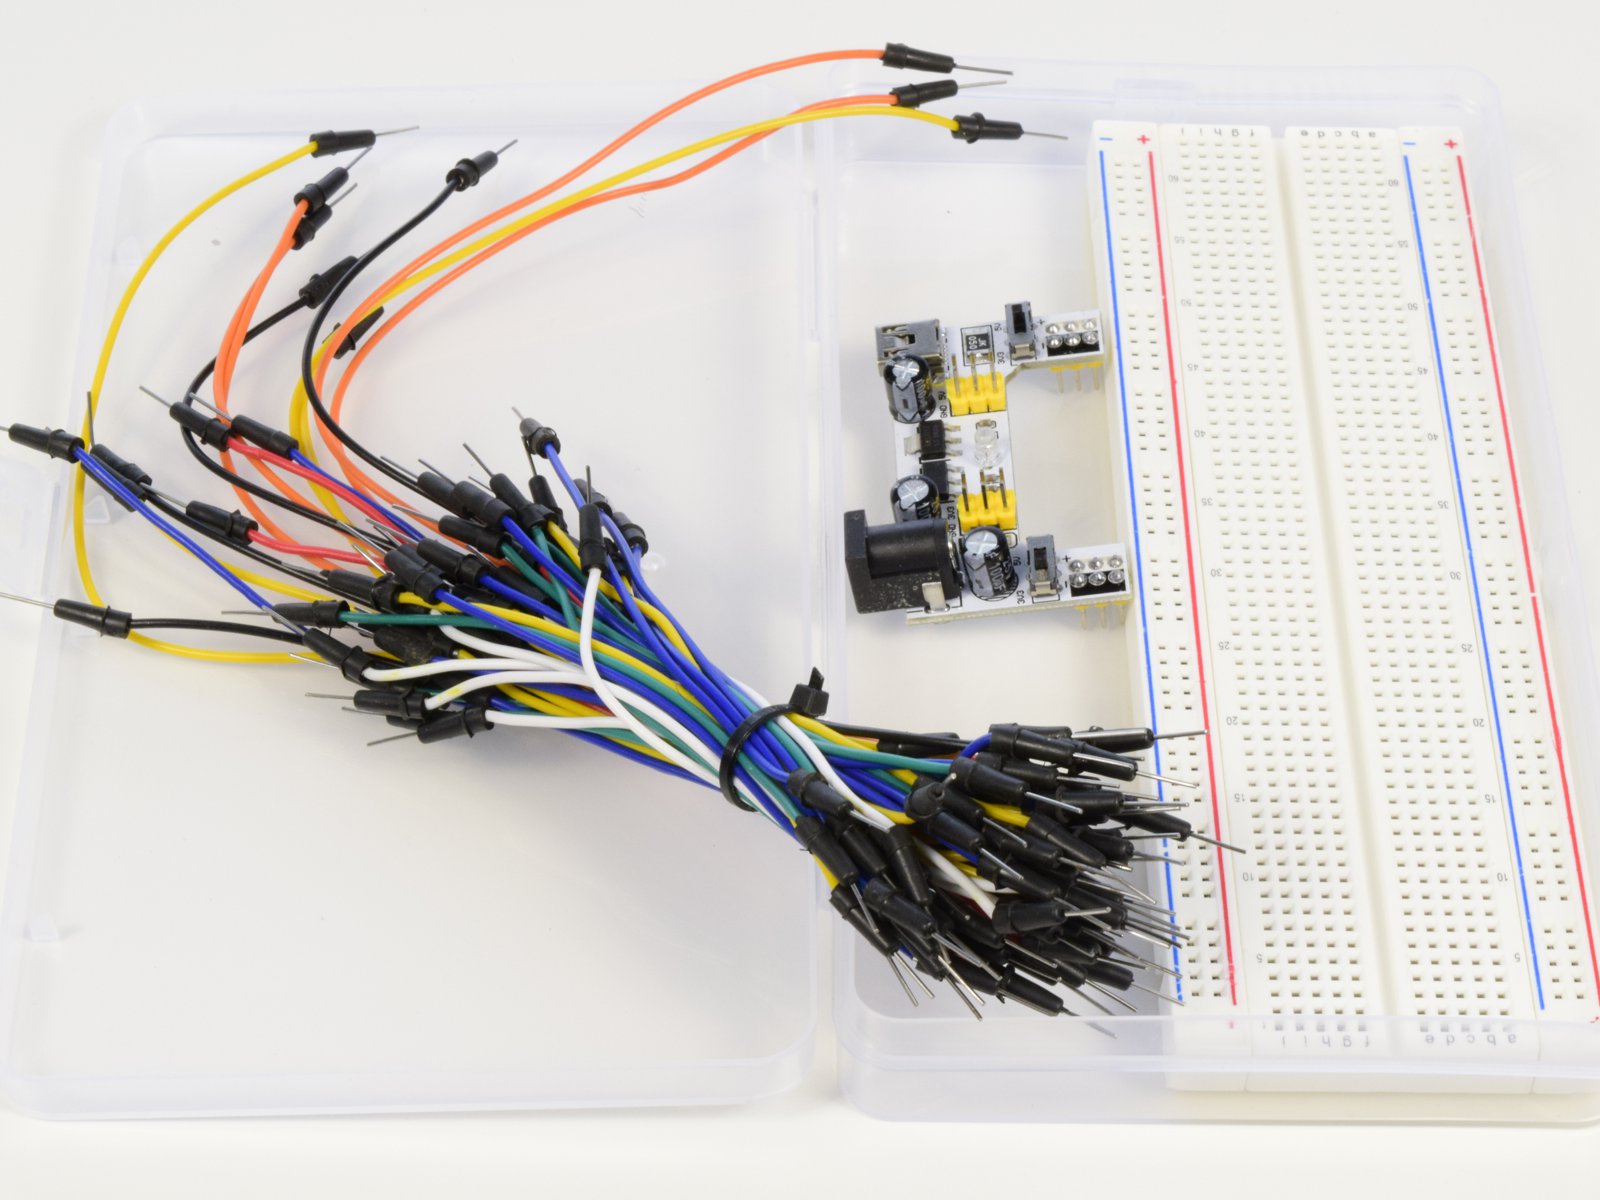 Breadboard 830 Starter Kit with wires and power supply 5